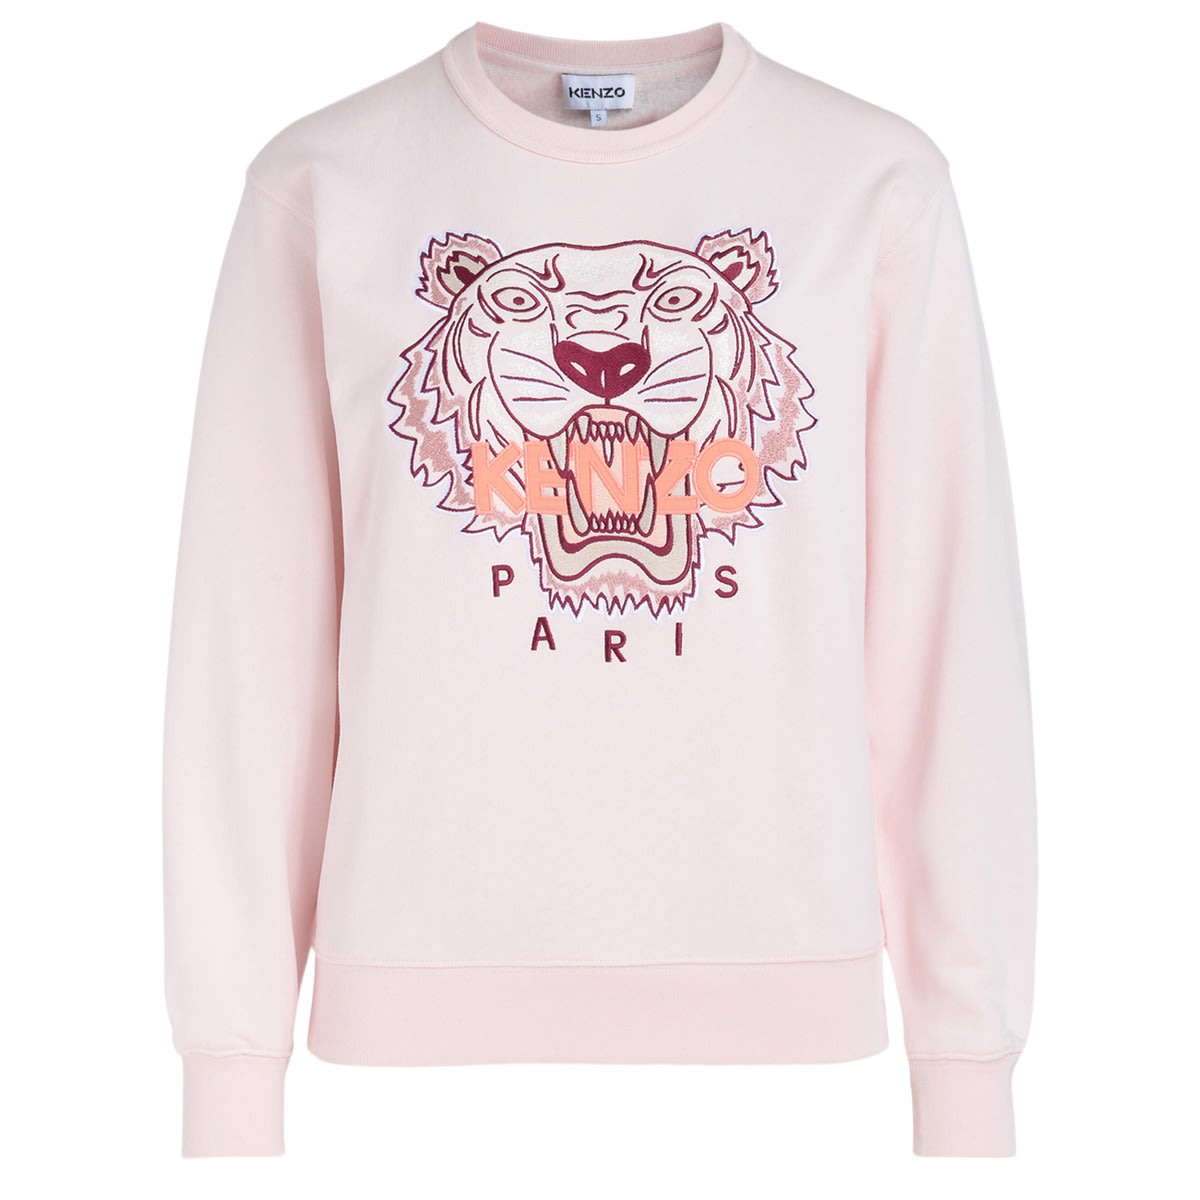 Kenzo Tiger Light Pink Crew-neck Sweatshirt With Violet Embroidery